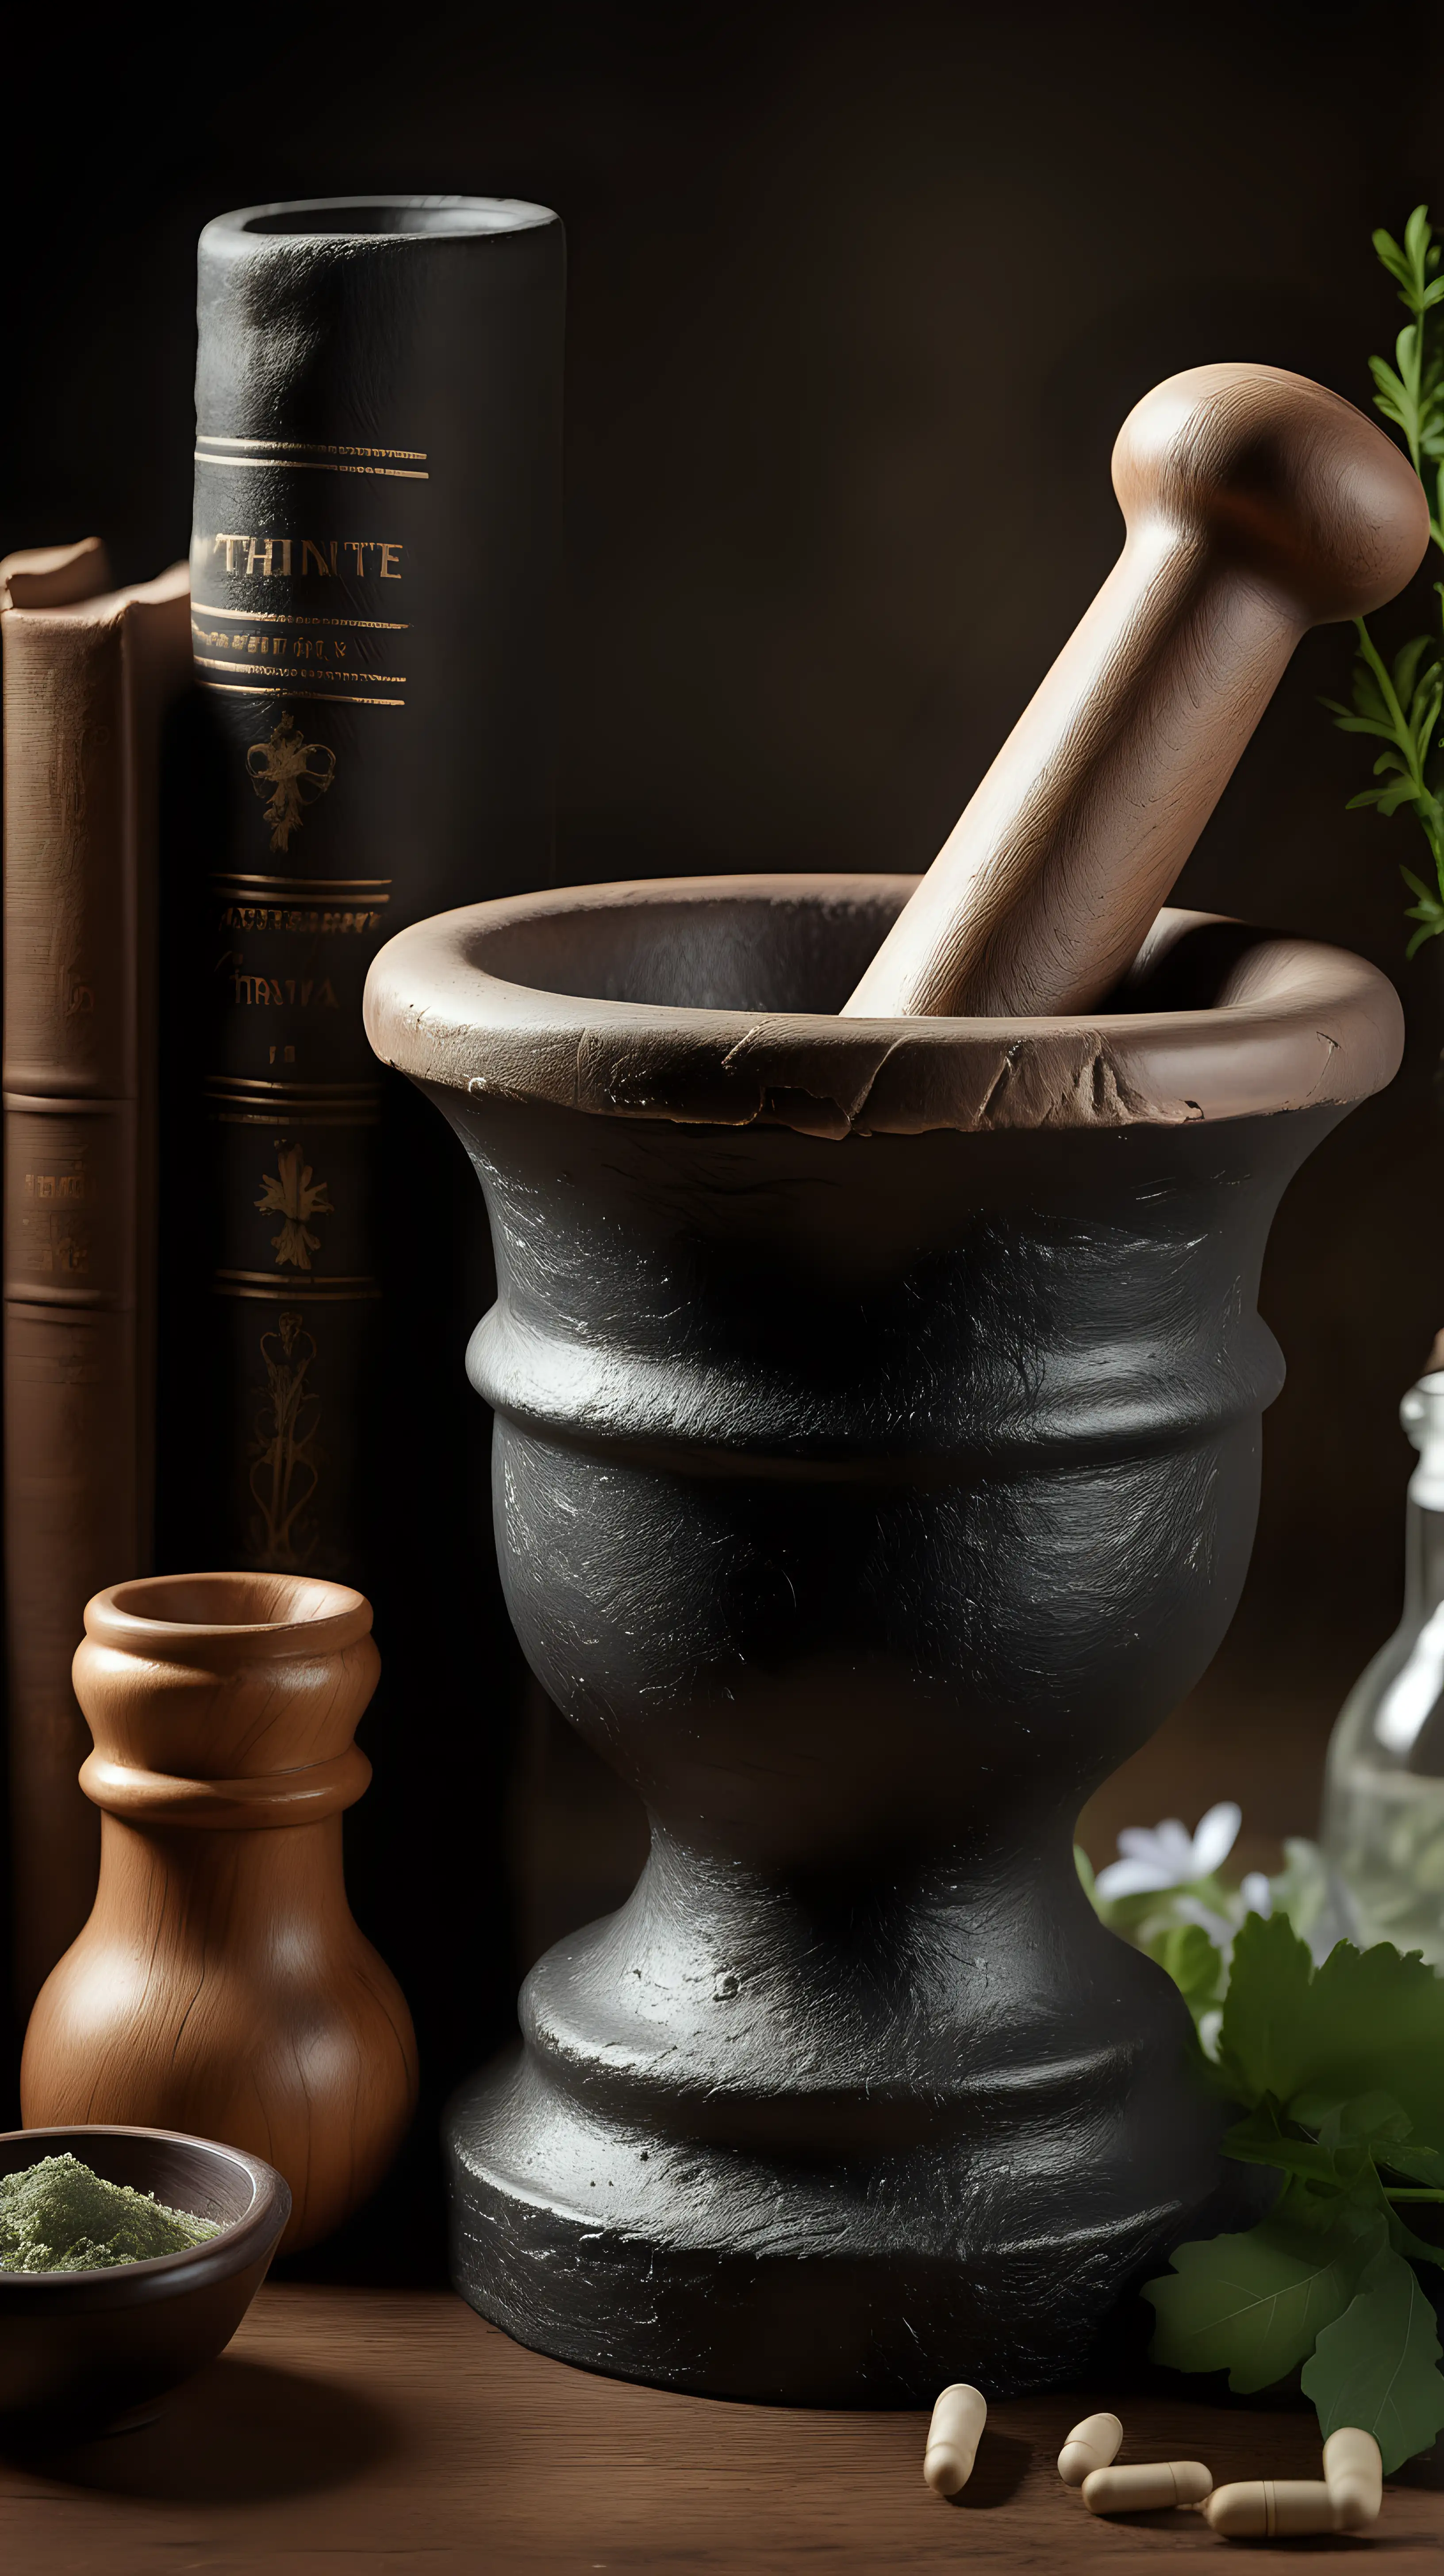 Imagine we're prompting, a captivating trivia background for medicine highlighting a vintage apothecary mortar and pestle. Showcase the details of this medical item with a high-quality camera model and lens. Illuminate the scene with soft, natural lighting, creating a visually appealing and focused composition for an immersive medicine trivia backdrop.